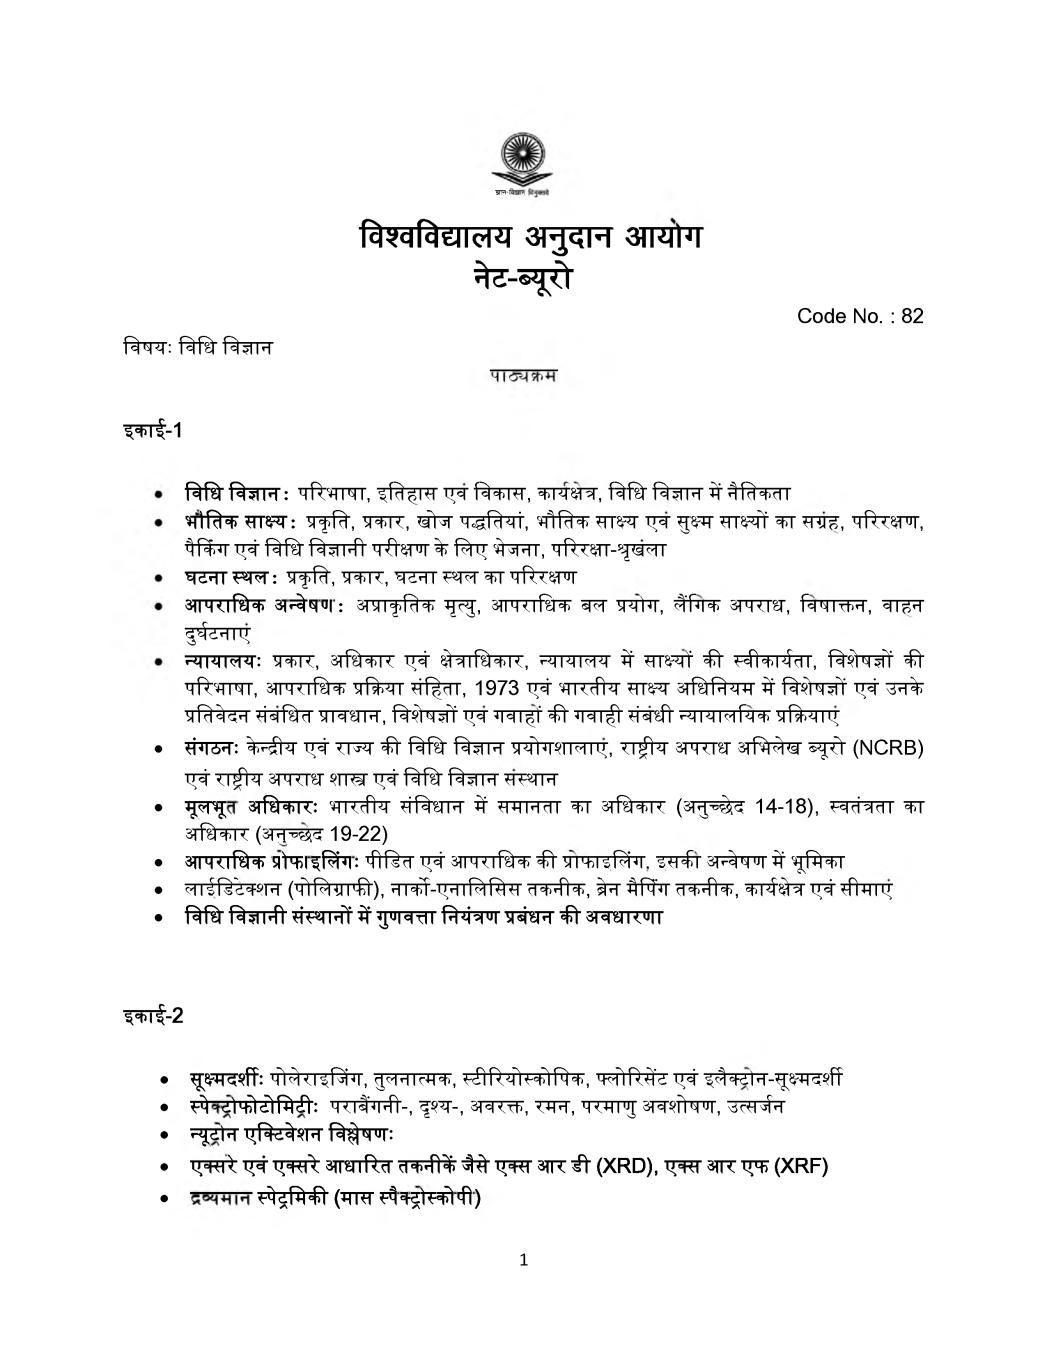 UGC NET Syllabus for Forensic Science 2020 in Hindi - Page 1